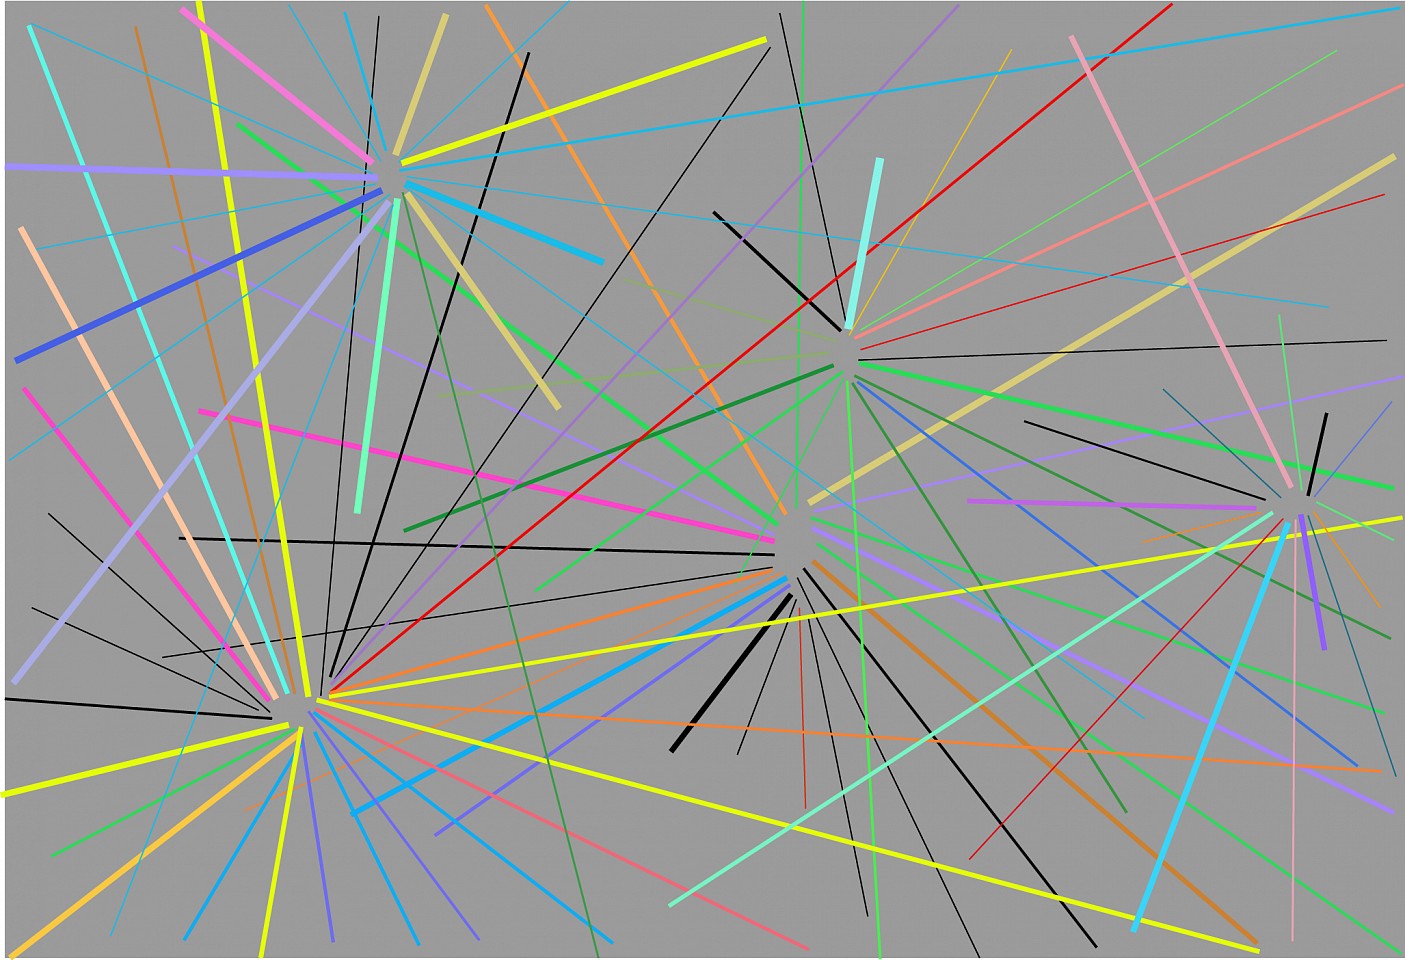 Dane Albert, Color Sticks #1, 2023
Acrylic on canvas (Concept), 48 x 72 in. (121.9 x 182.9 cm)
Series of colored lines and shapes in multiple configurations
DA.2023.sticks-001